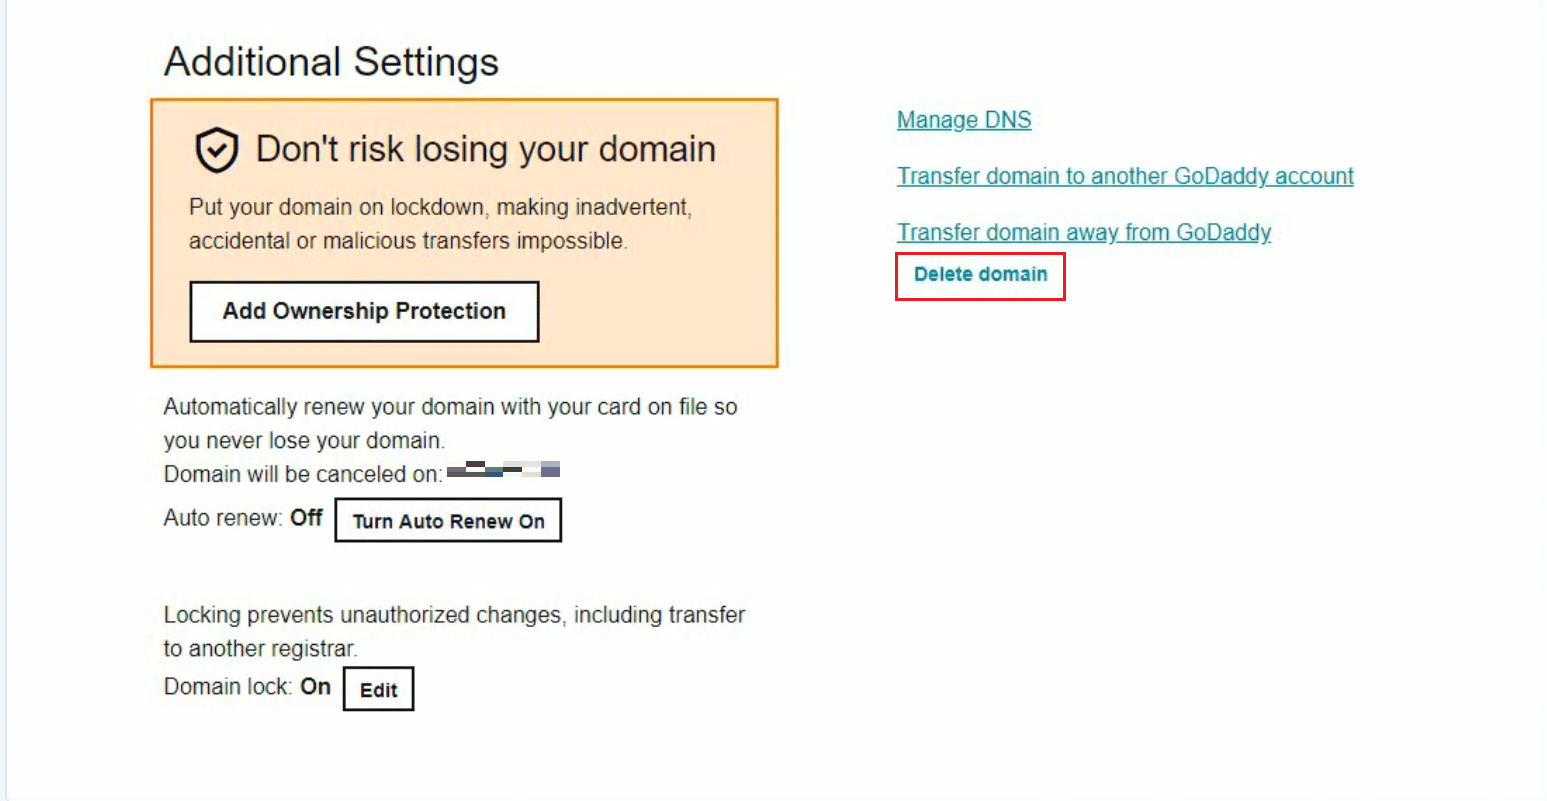 Scroll down to the bottom and click on the Delete domain option from the Additional settings section | 